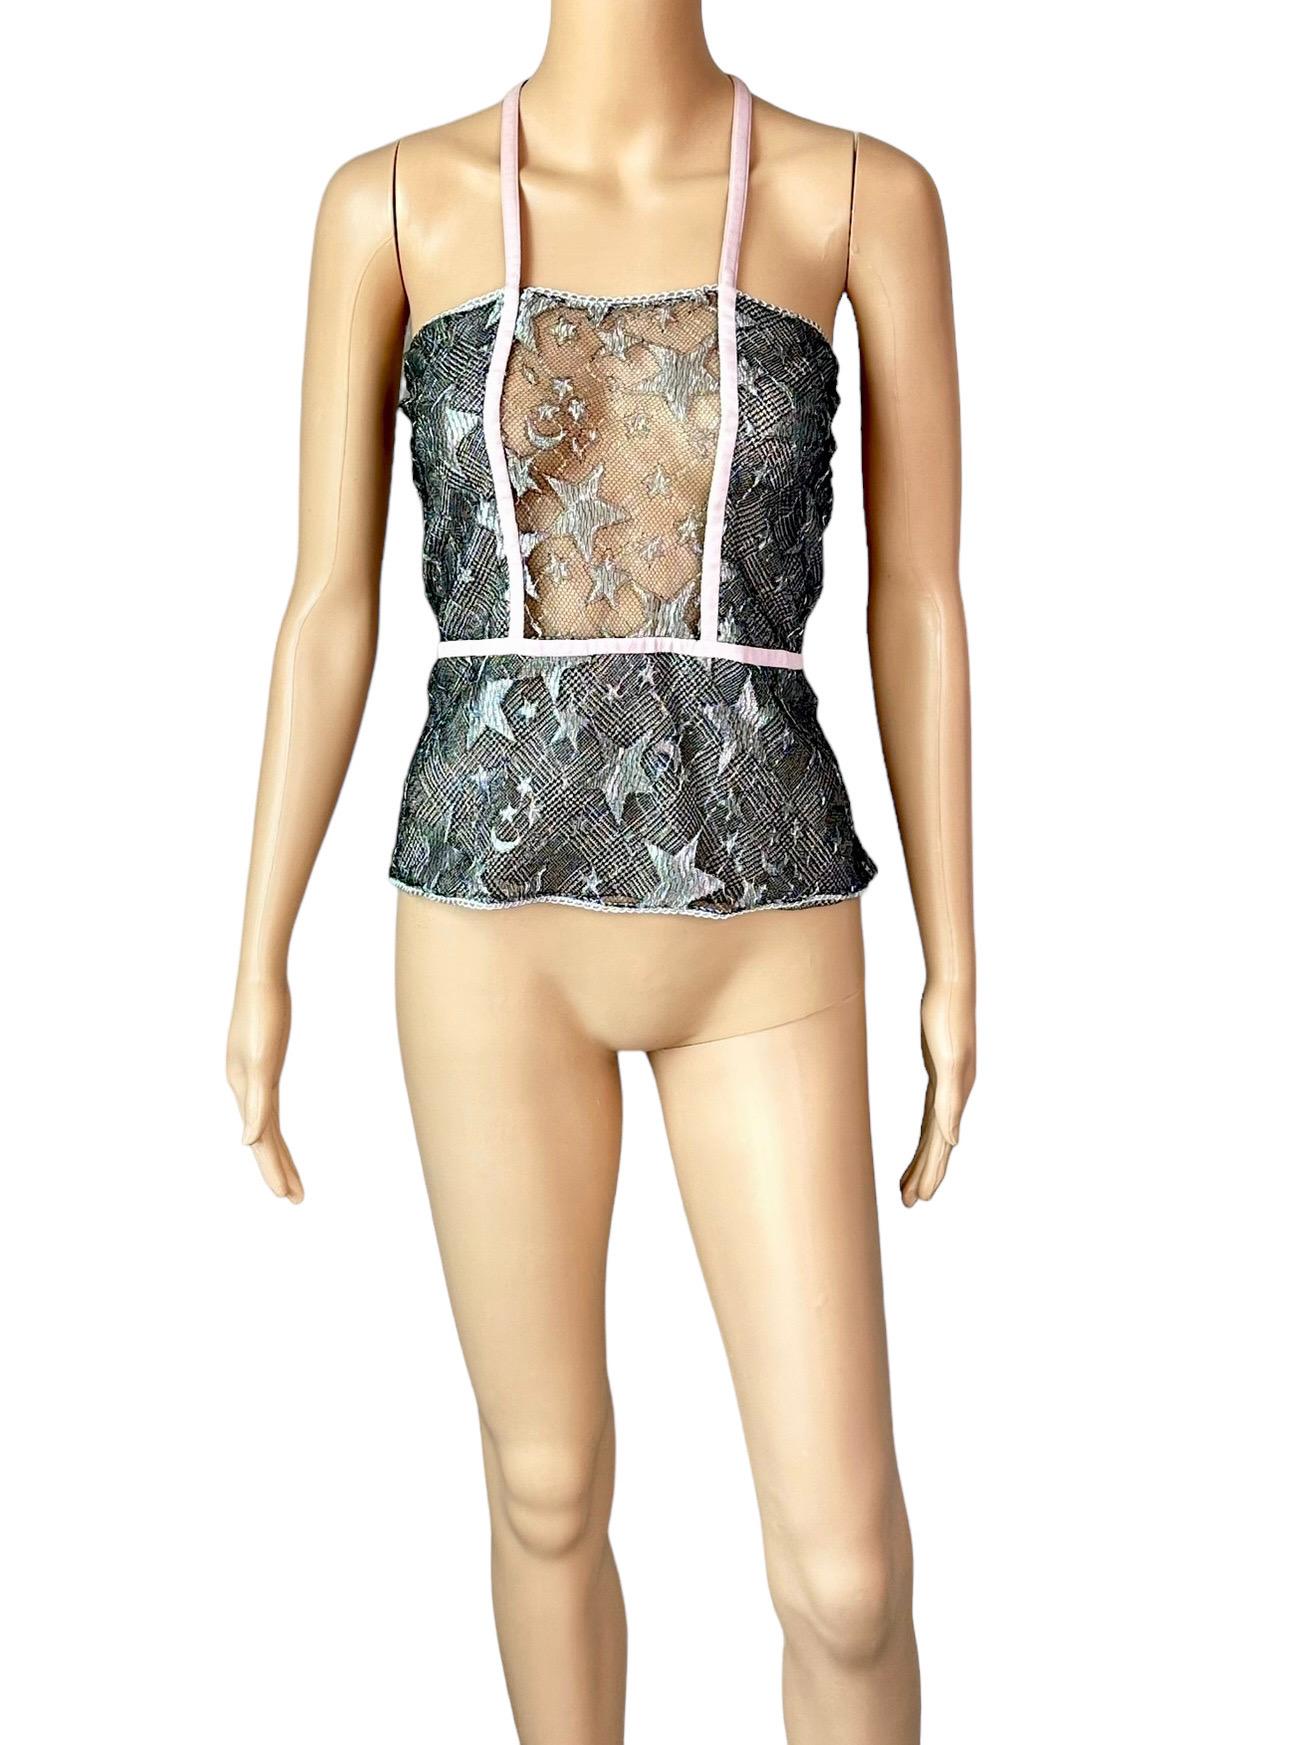 Gianni Versace S/S 1998 Runway Sheer Lace Star Wrap Top  For Sale 5